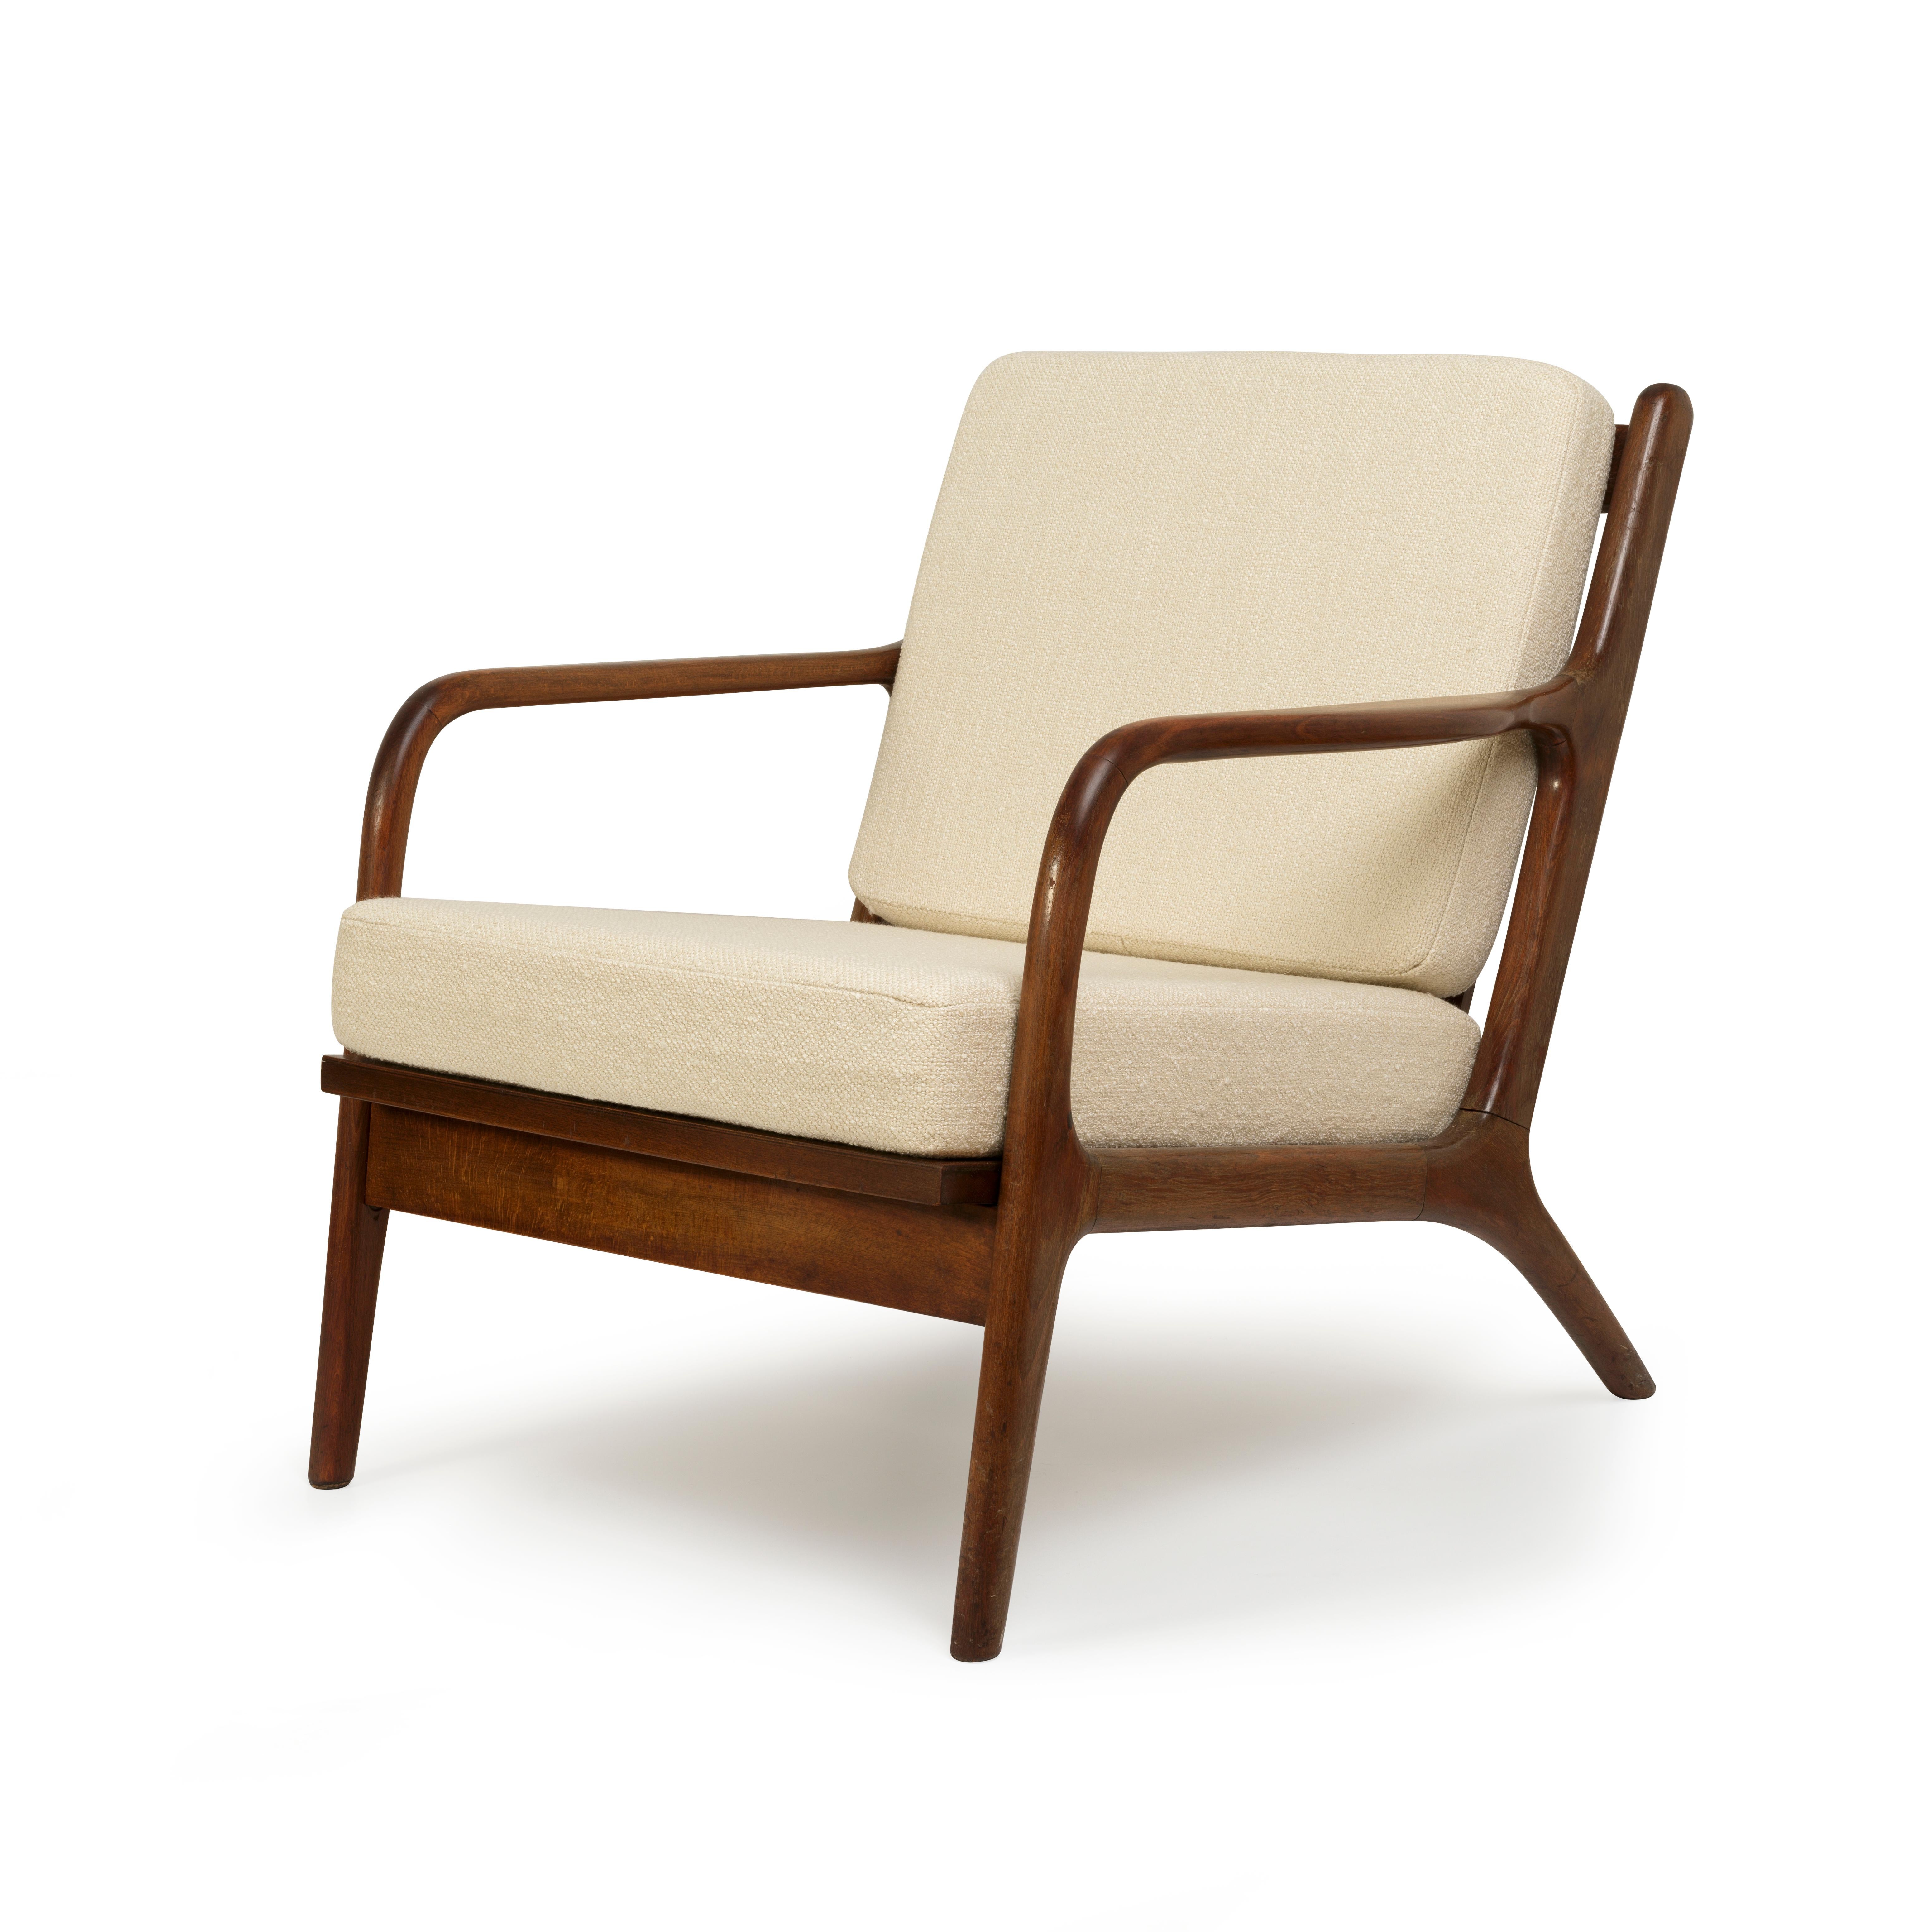 Adrian Pearsall was born in 1925 in Trumansburg, New York. Like many Mid-Century Modern artists of the time, Pearsall was a graduate of architecture school. This background is profoundly evident in this pair of “2315-C” lounge chairs, showing